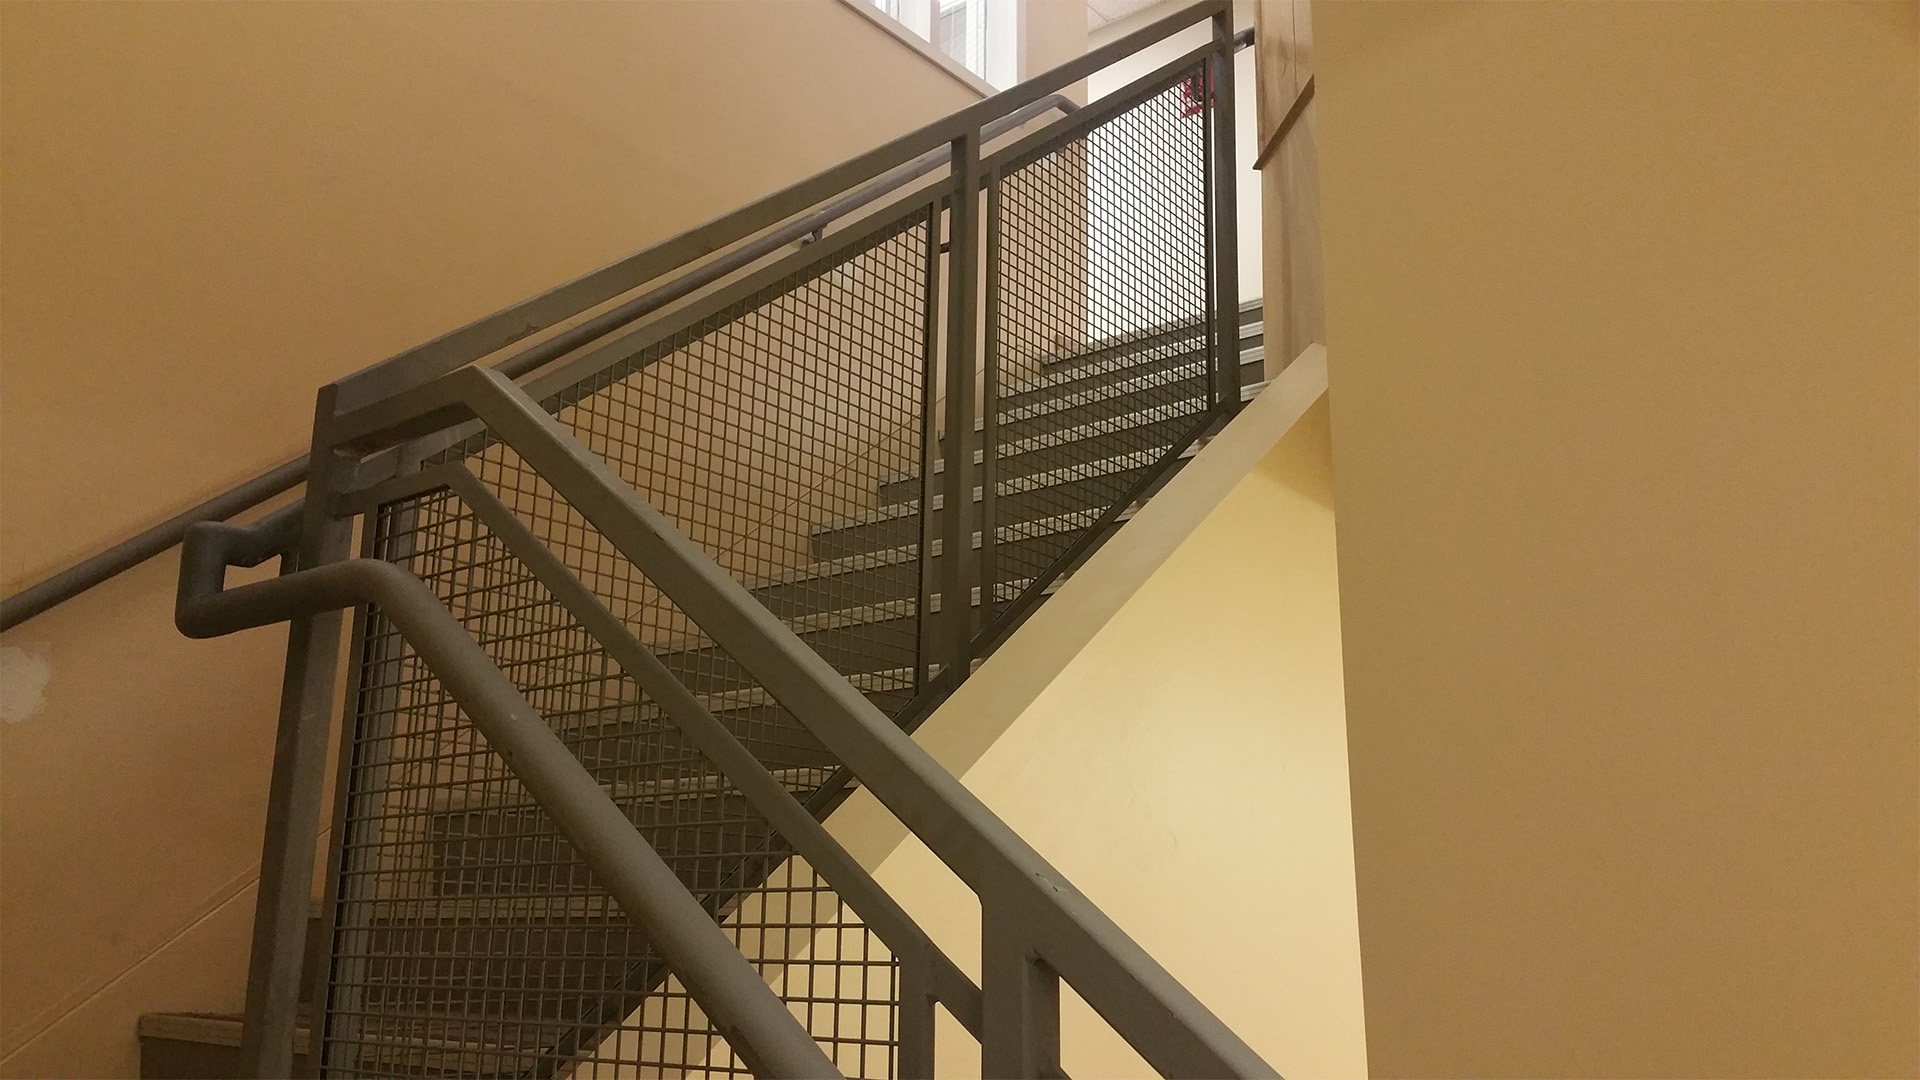 Building Codes & Regulations That Metal Stair Fabricator, Team BES, Takes Into Account